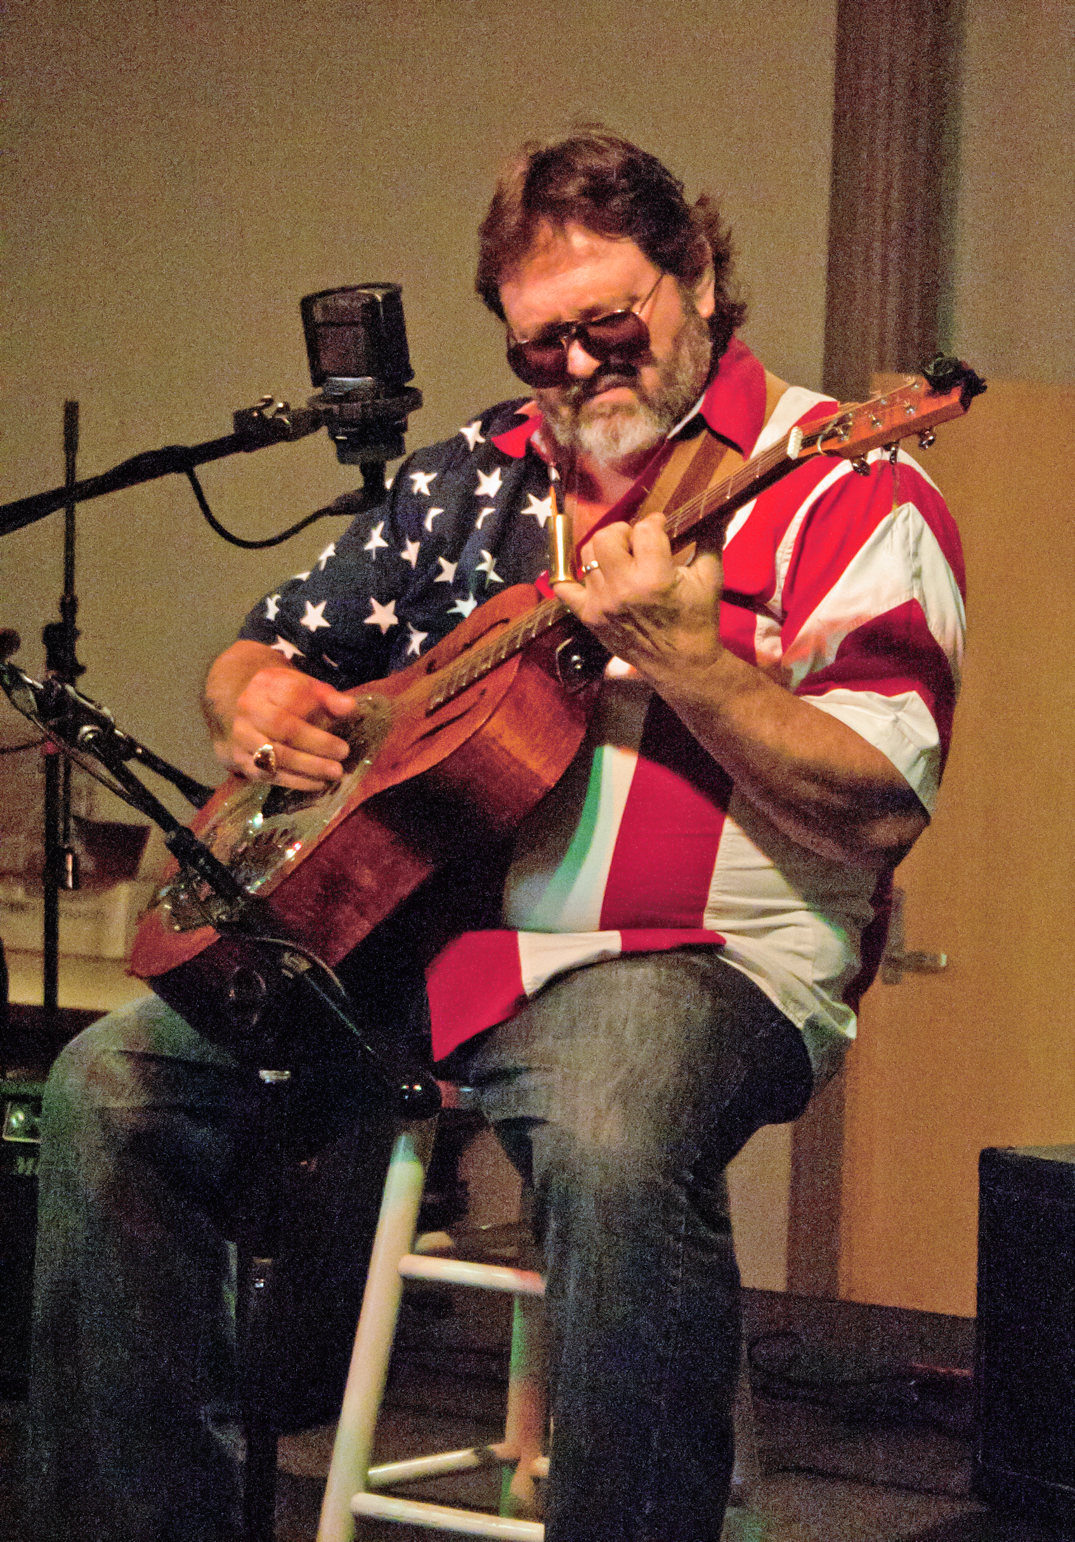 Ellis Kell at the 2013 Mississippi Valley Blues Festival. Photo by Stan Furlong.